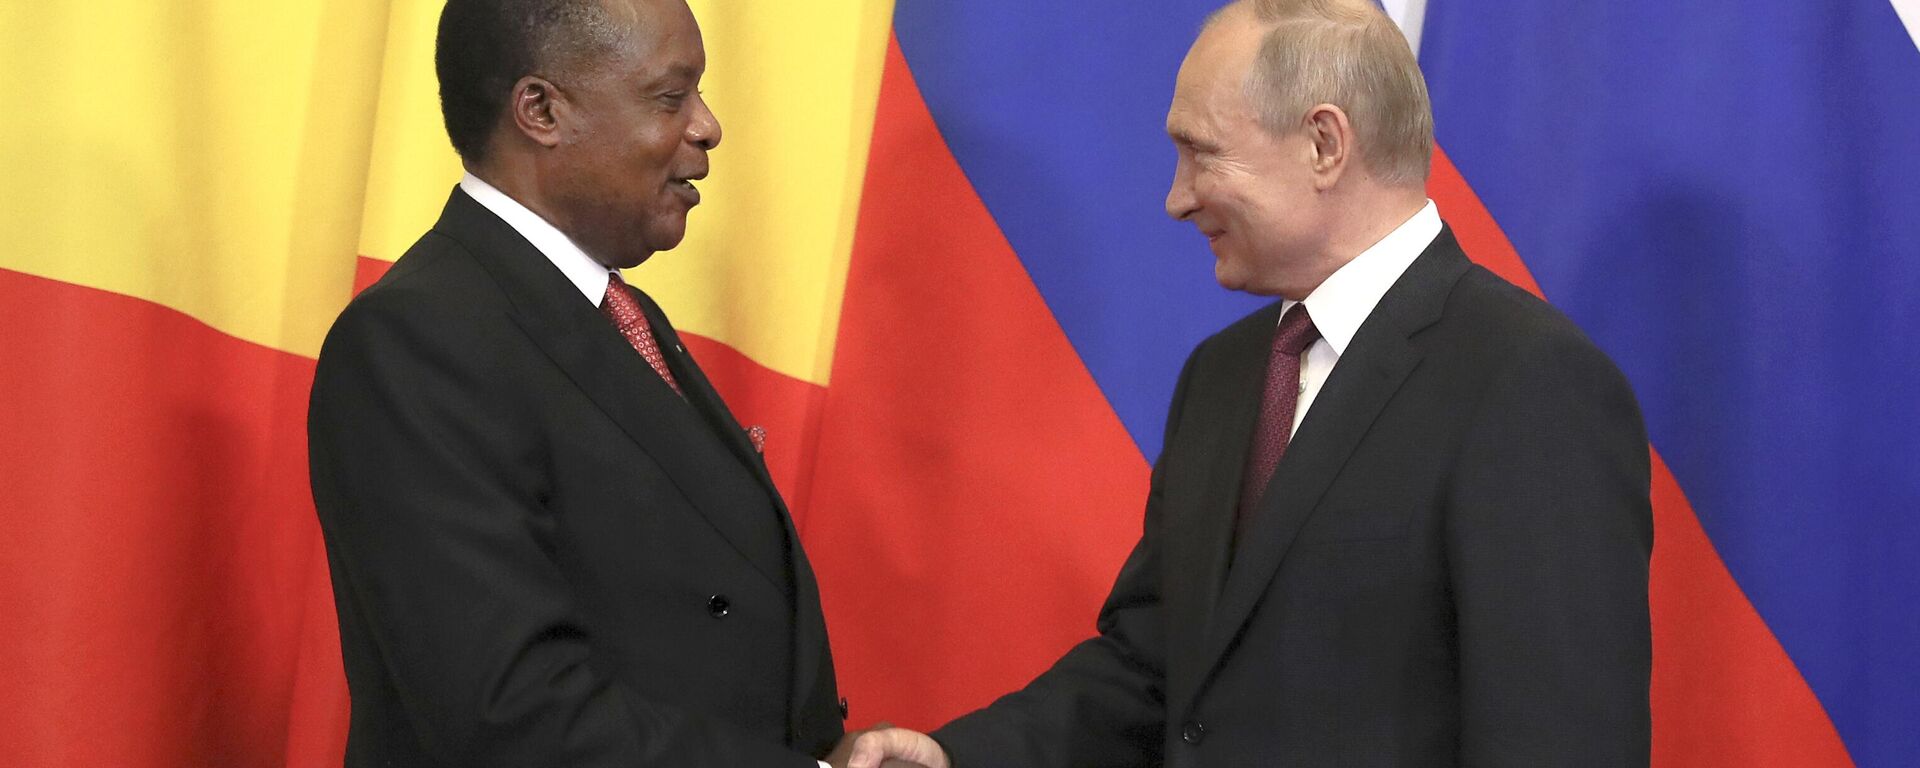 Russian President Vladimir Putin, right, shakes hands with President of Congo-Brazzaville Denis Sassou Nguesso during a signing ceremony following their talks in the Kremlin in Moscow, Russia, Thursday, May 23, 2019  - Sputnik Africa, 1920, 09.08.2023